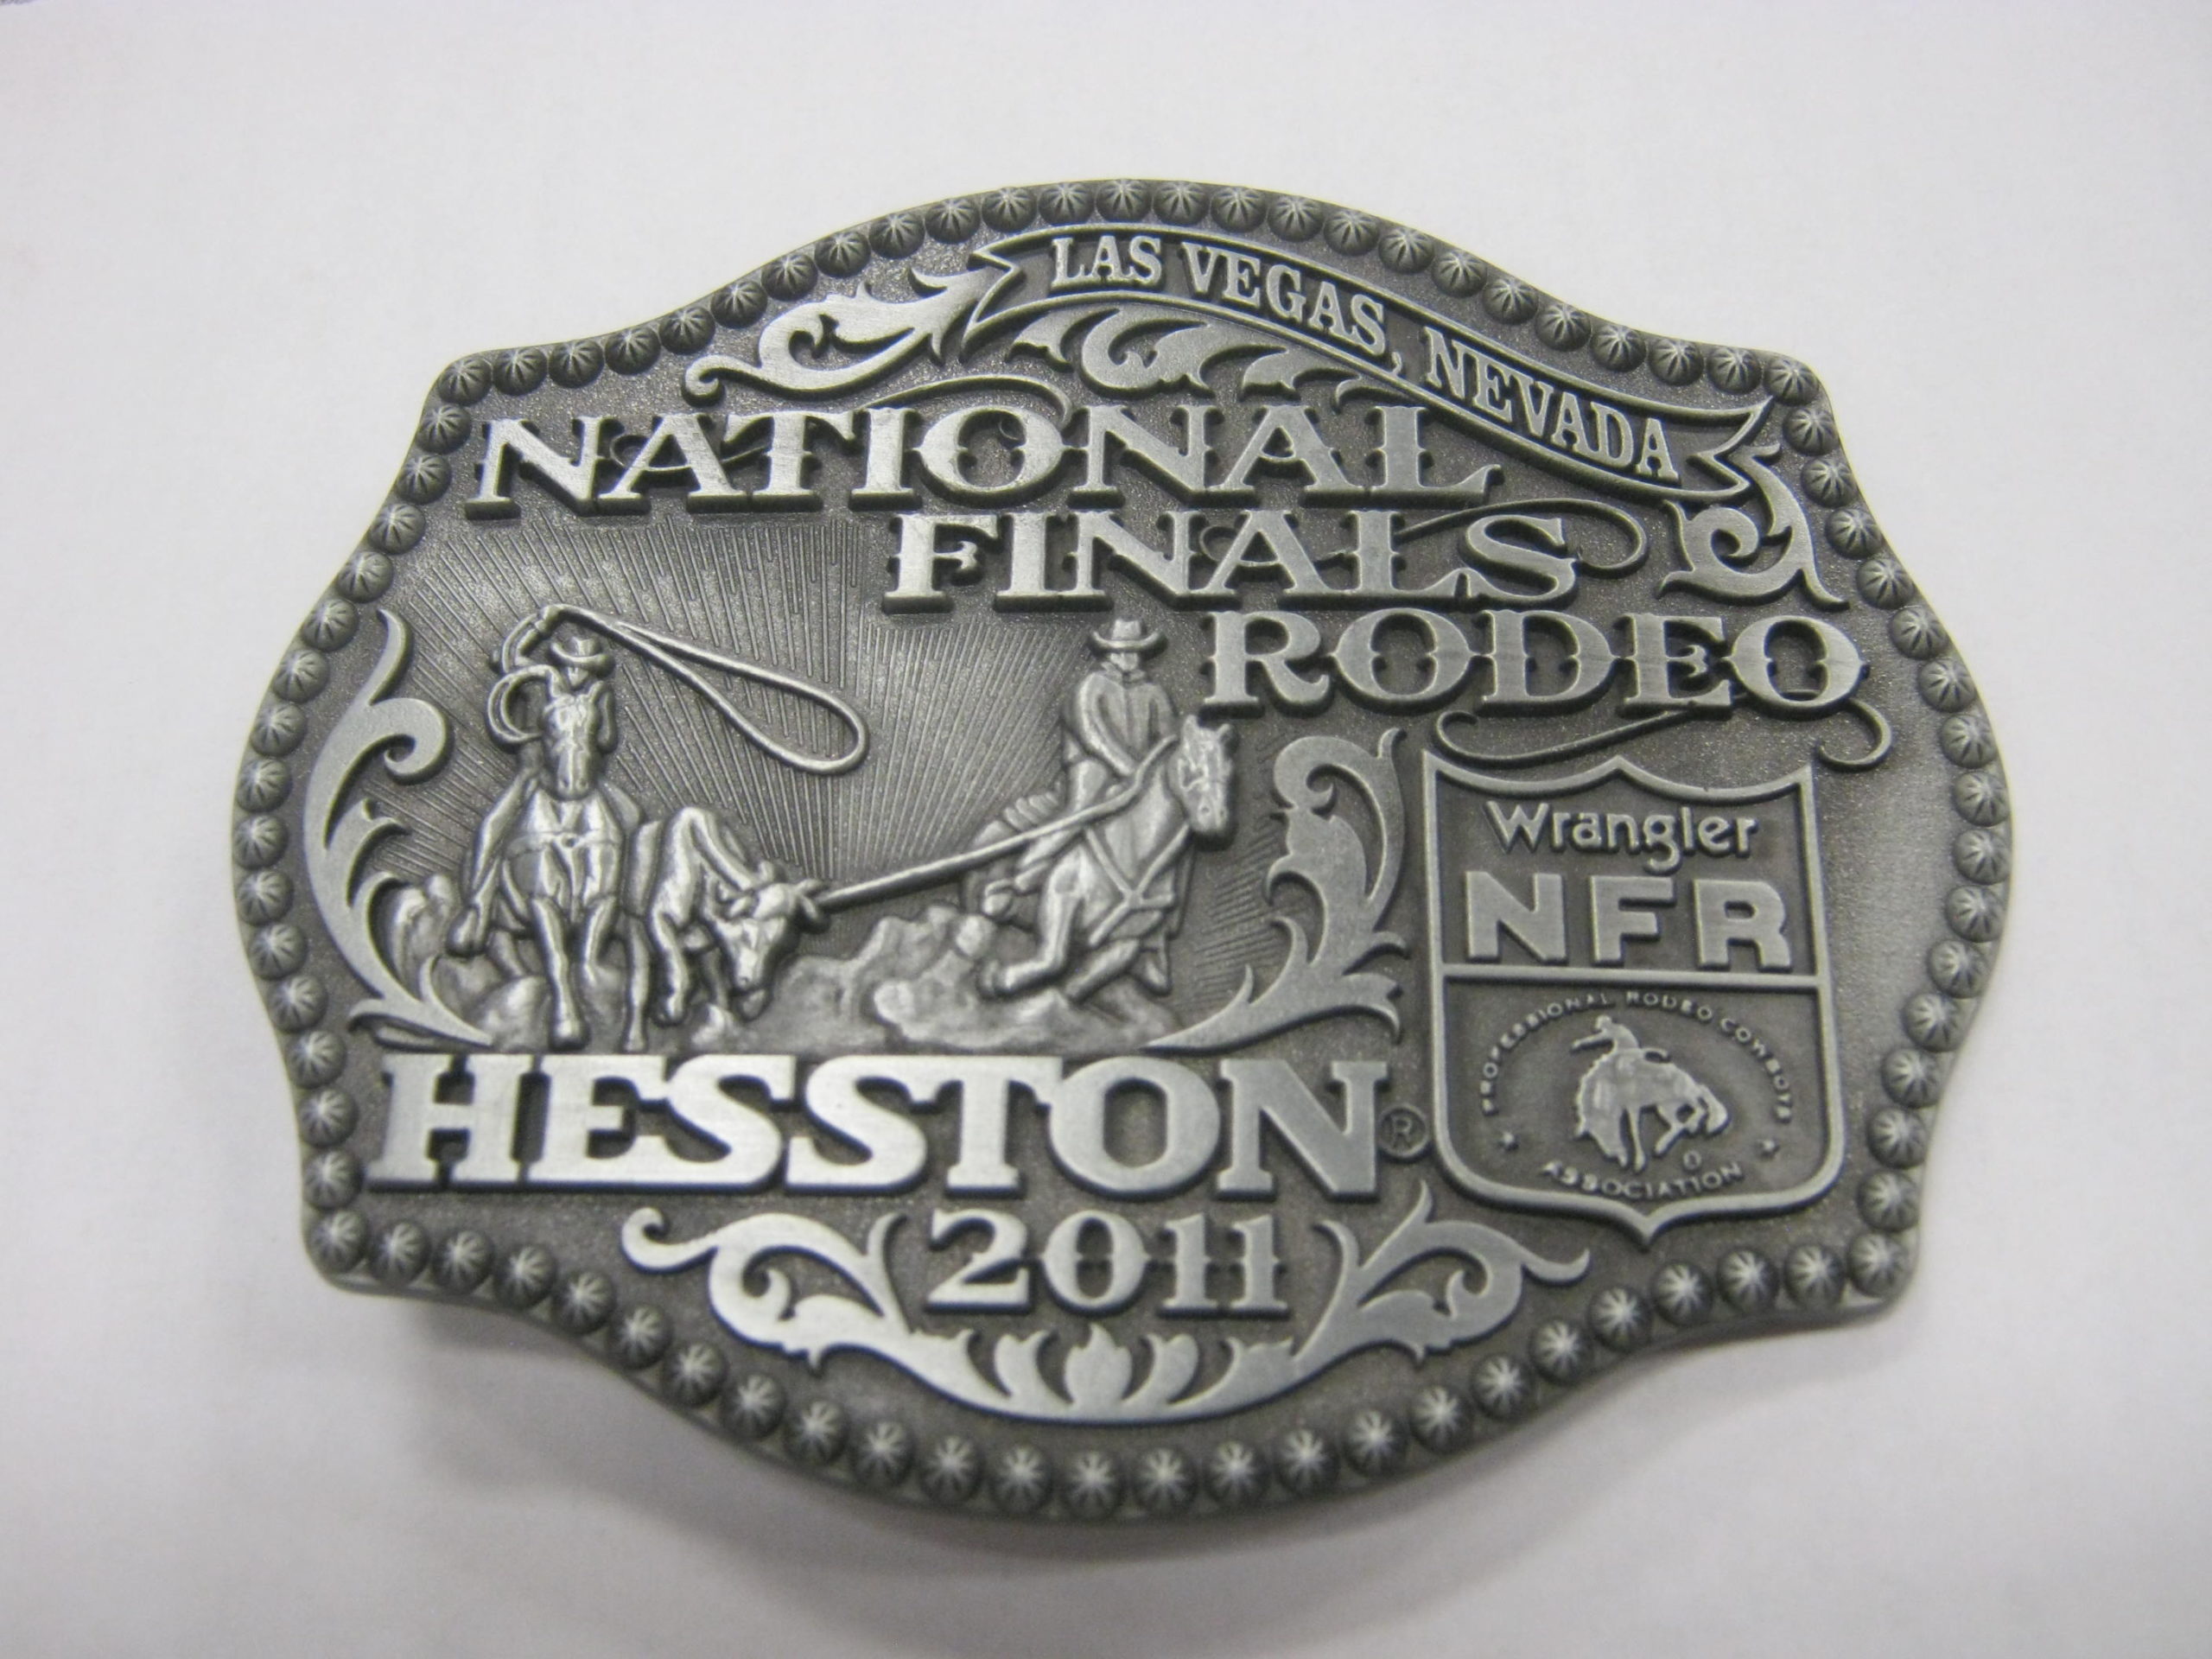 National Finals Rodeo Hesston 2011 NFR Adult Cowboy Buckle New Wrangler AGCO 